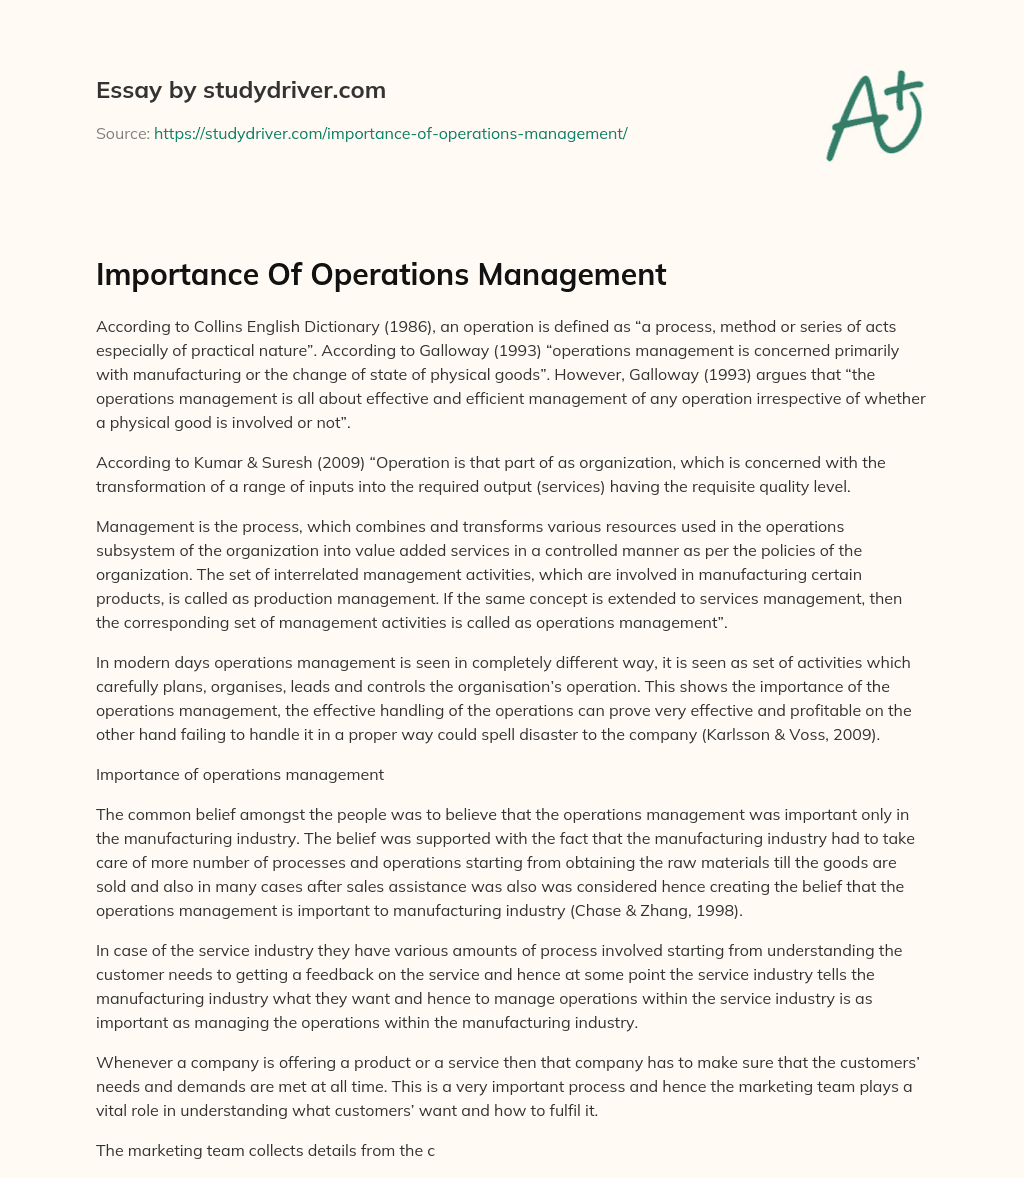 Importance of Operations Management essay